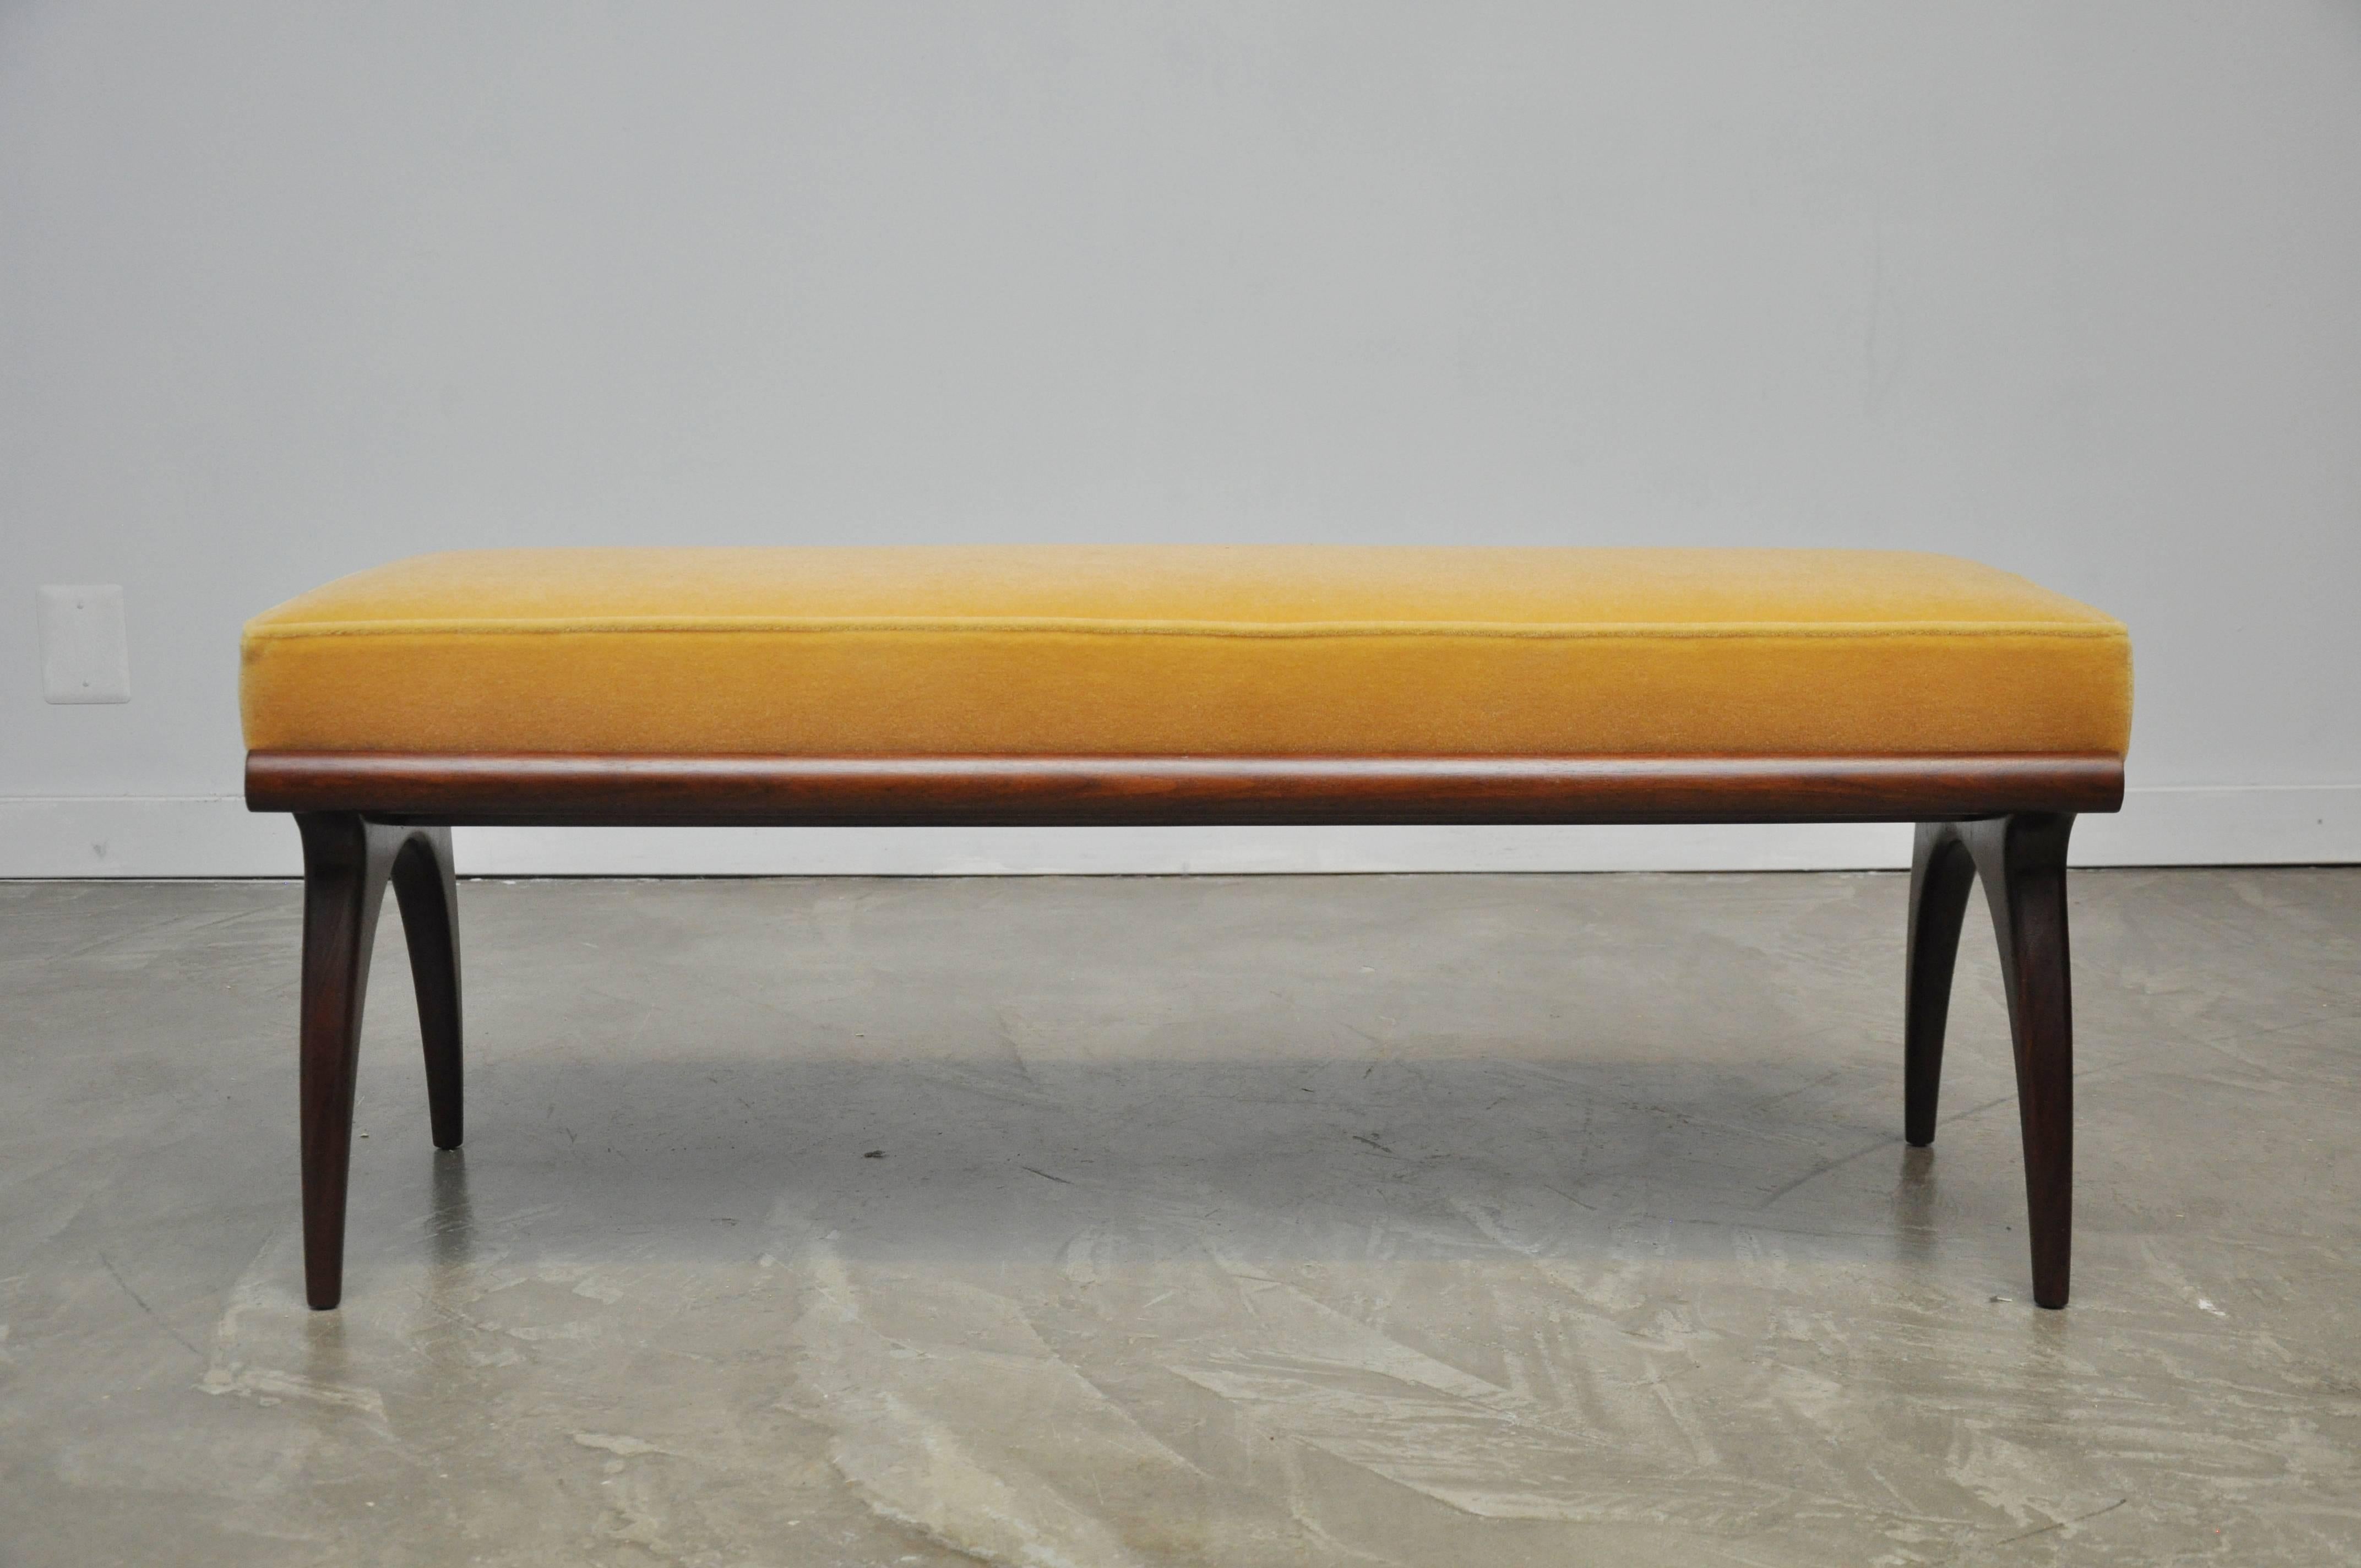 Bertha Schaefer bench for Singer and sons. Sculptural walnut frame with yellow/gold mohair.